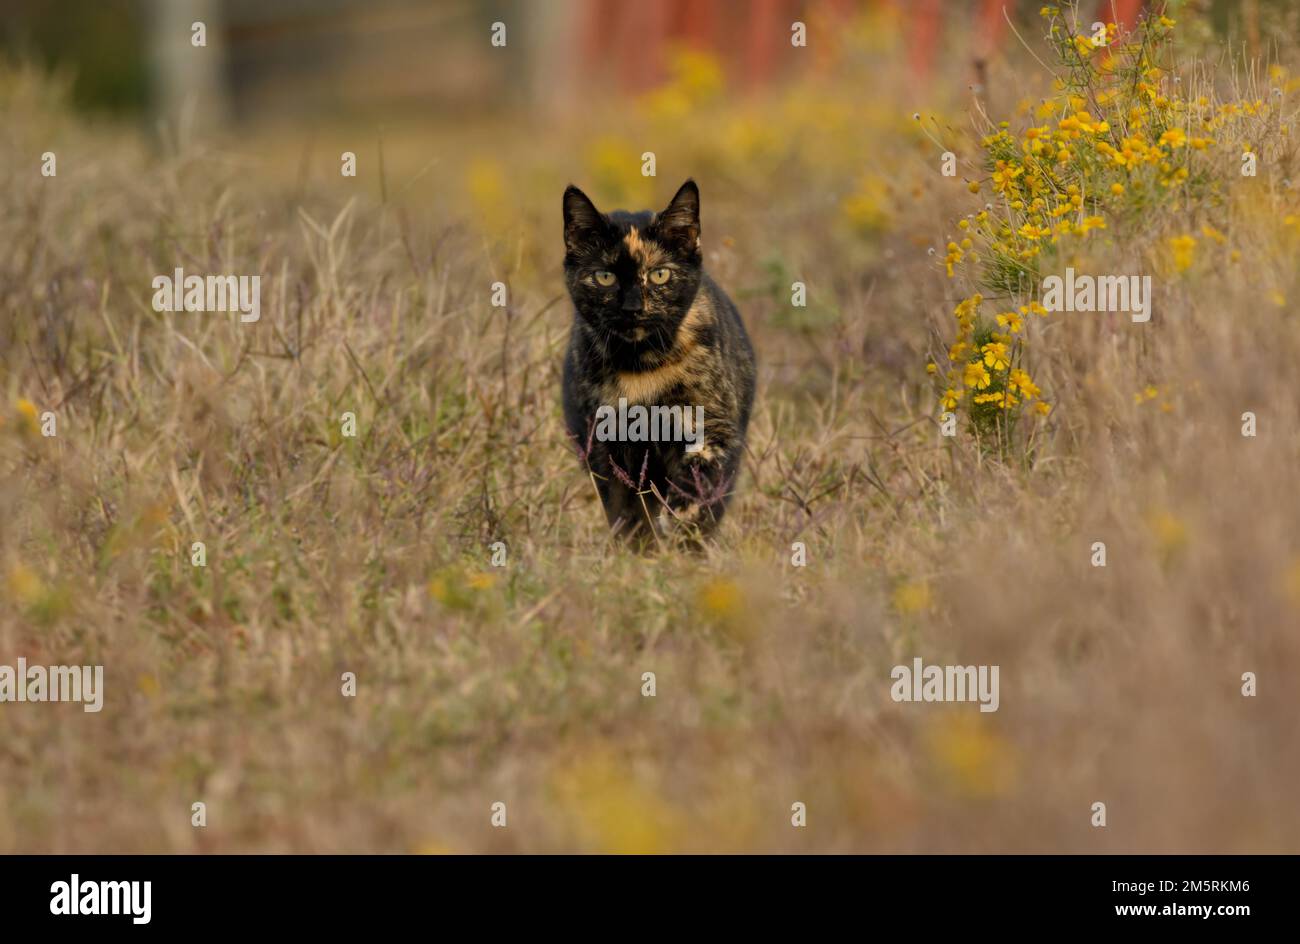 Beautiful black and ginger cat walking towards viewer through fall grass and yellow wildflowers Stock Photo